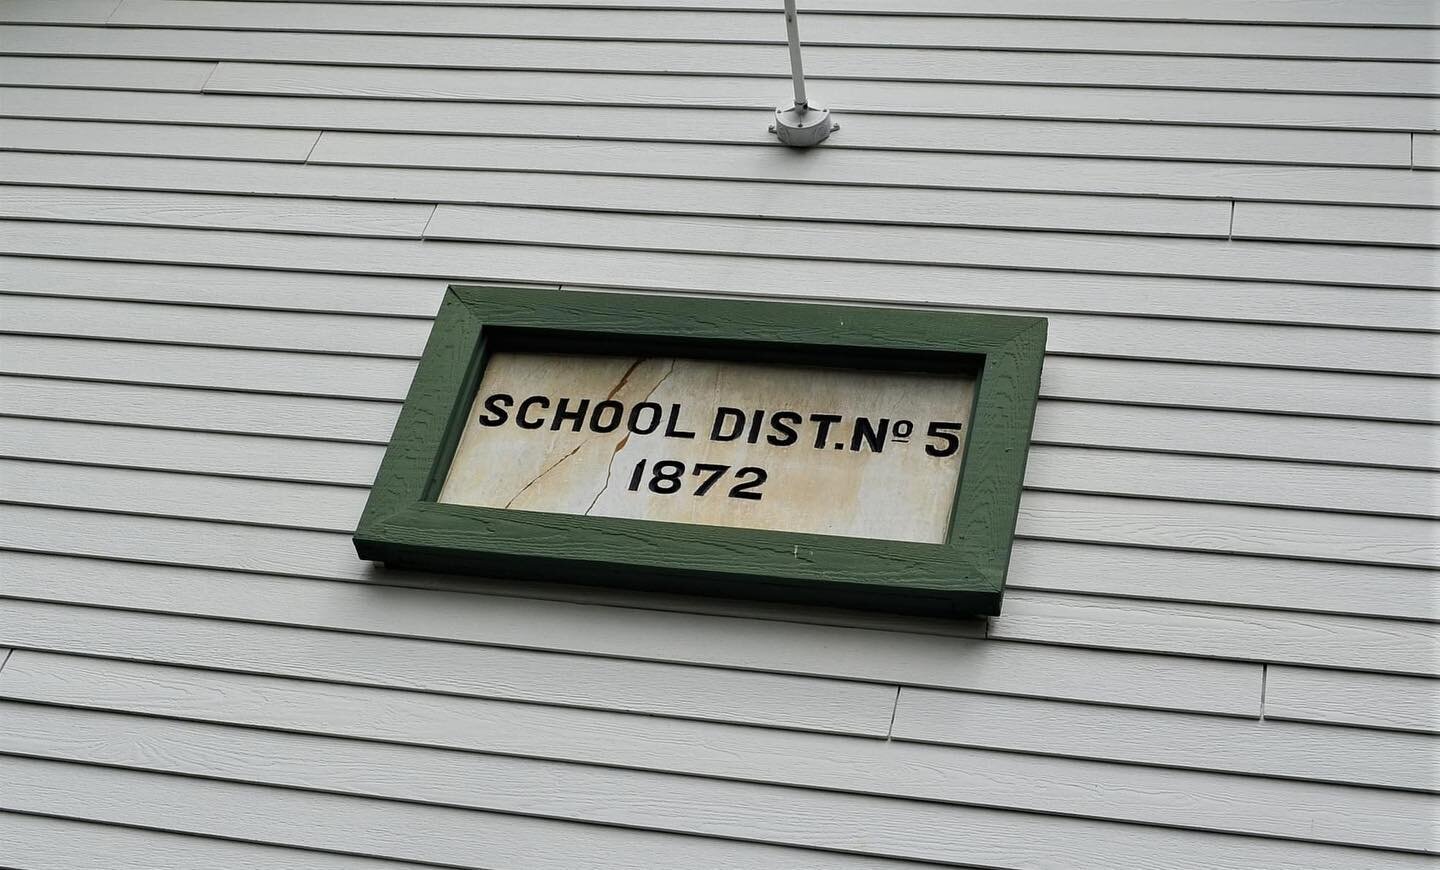 We hope everyone has a great first week of school!

#backtoschool #firstdayofschool #schoolhouse #518family